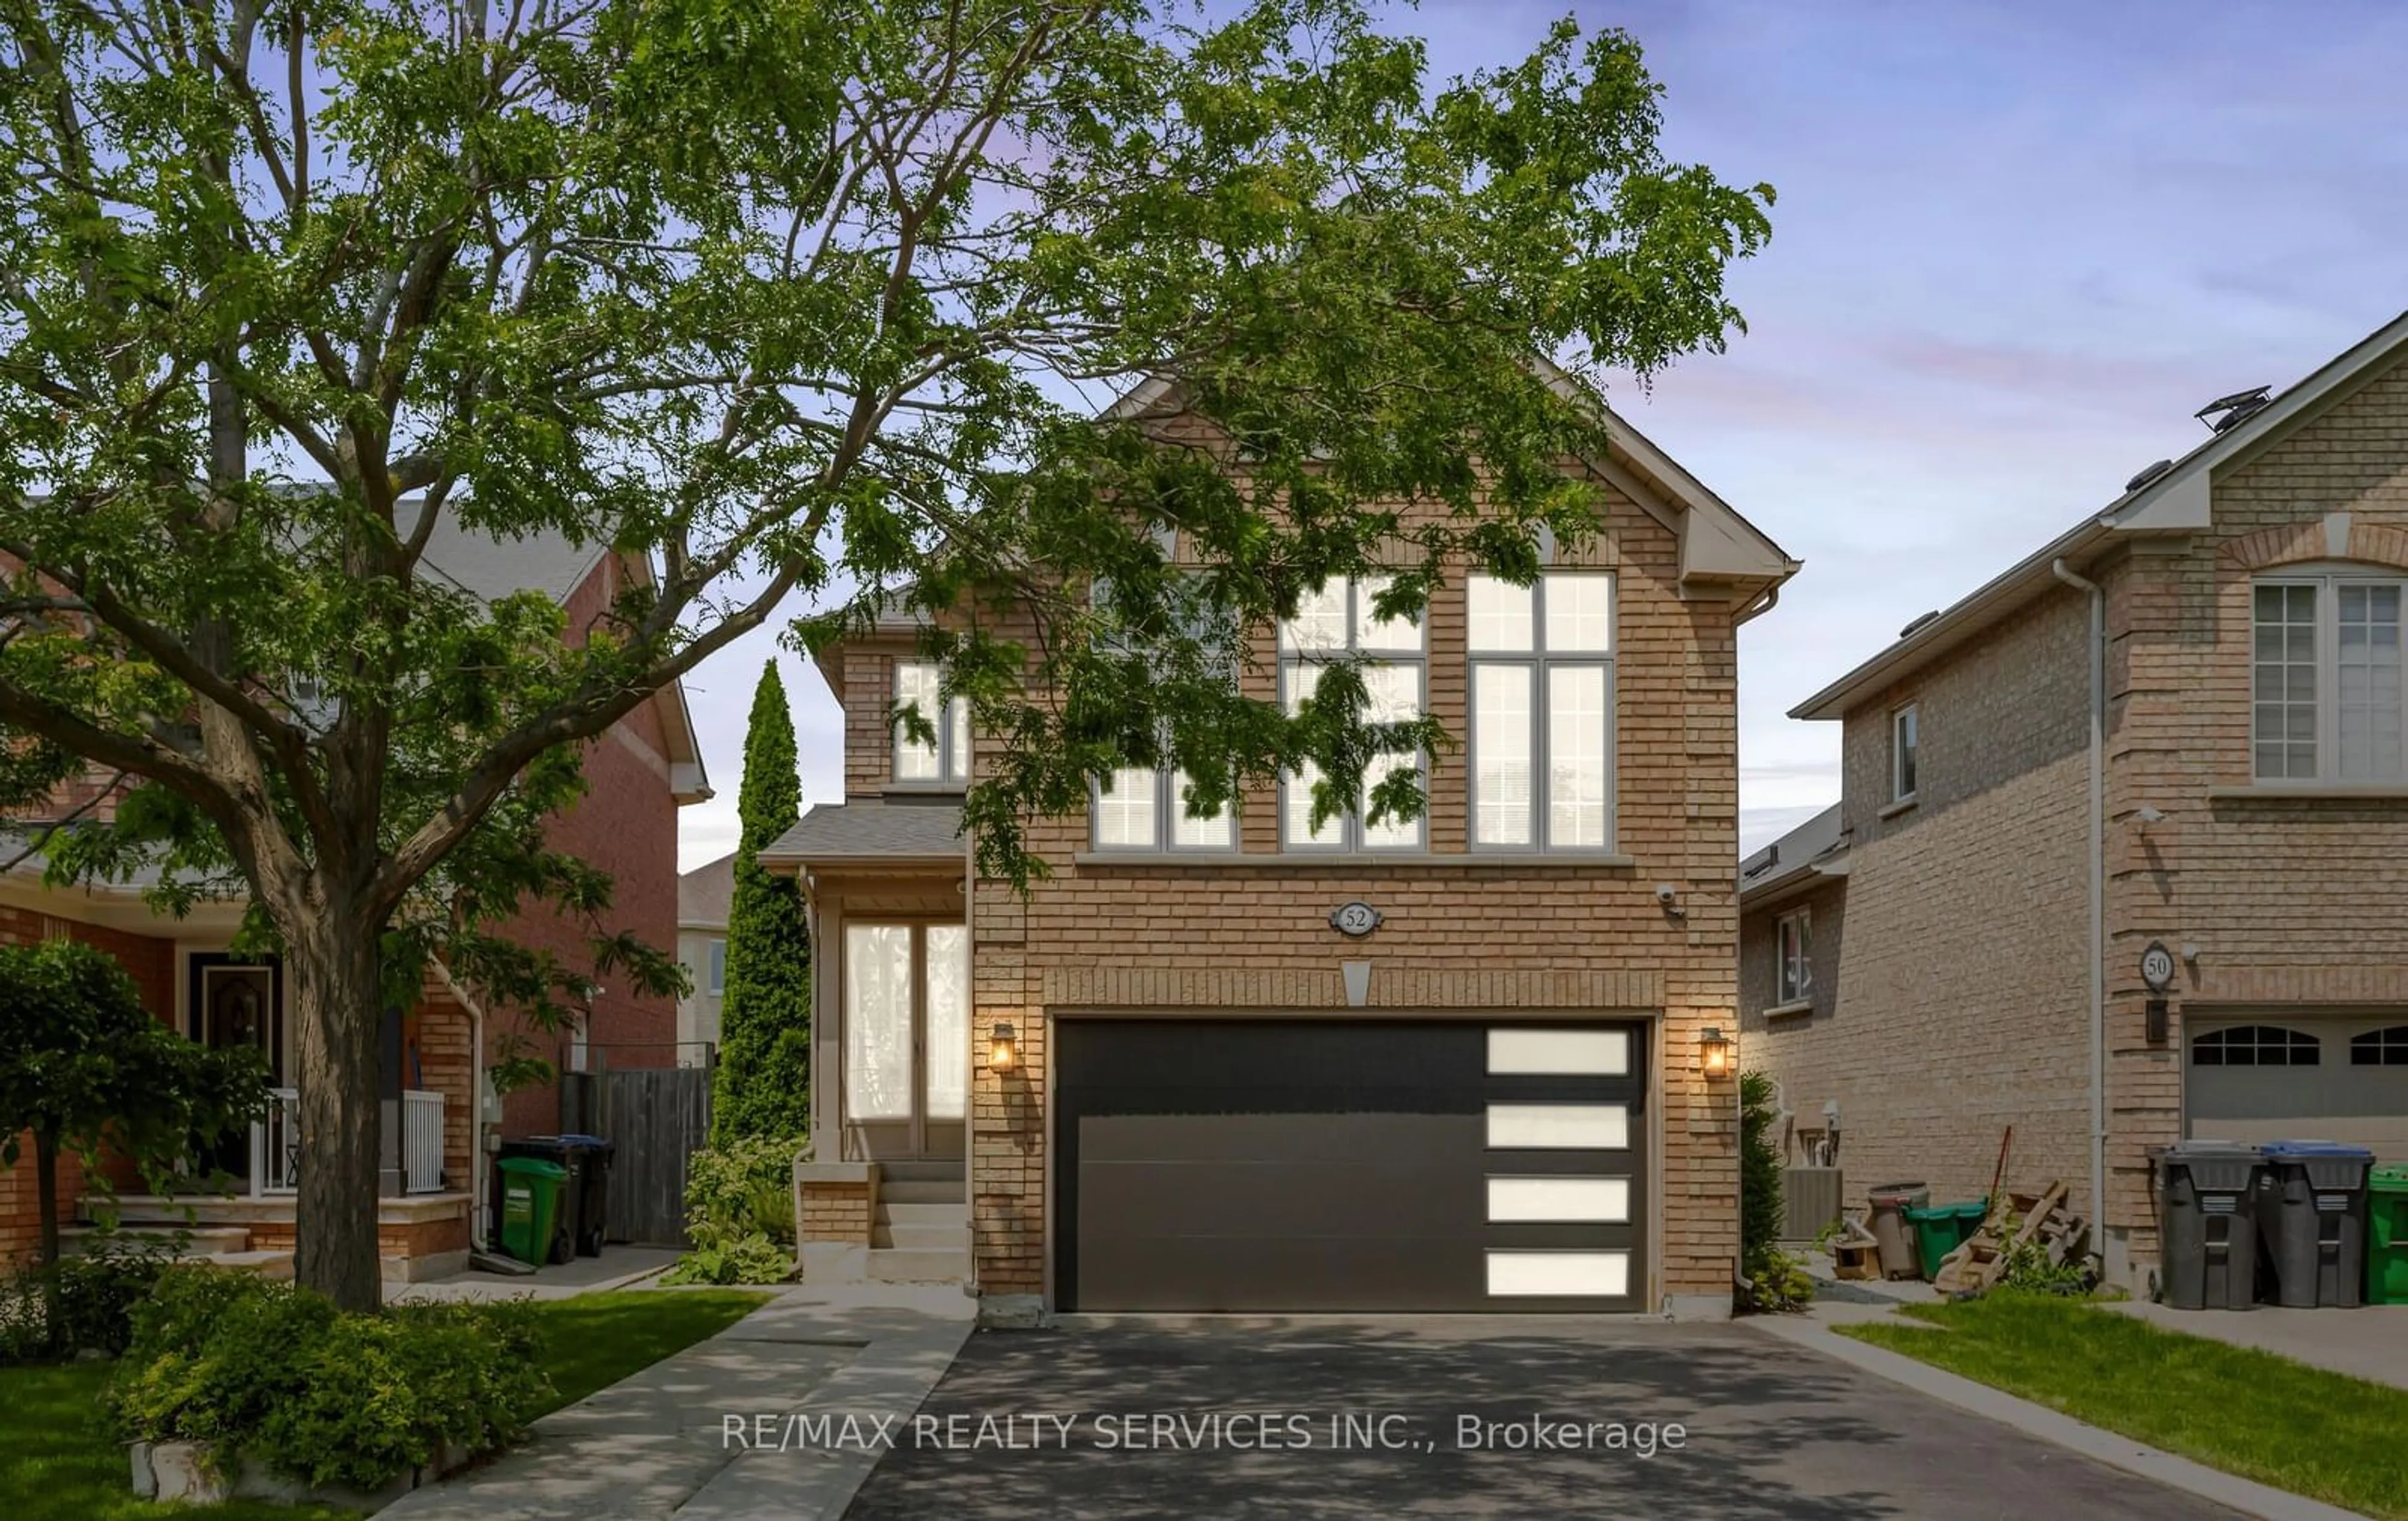 Home with brick exterior material for 52 Sunny Glen Cres, Brampton Ontario L7A 2C6